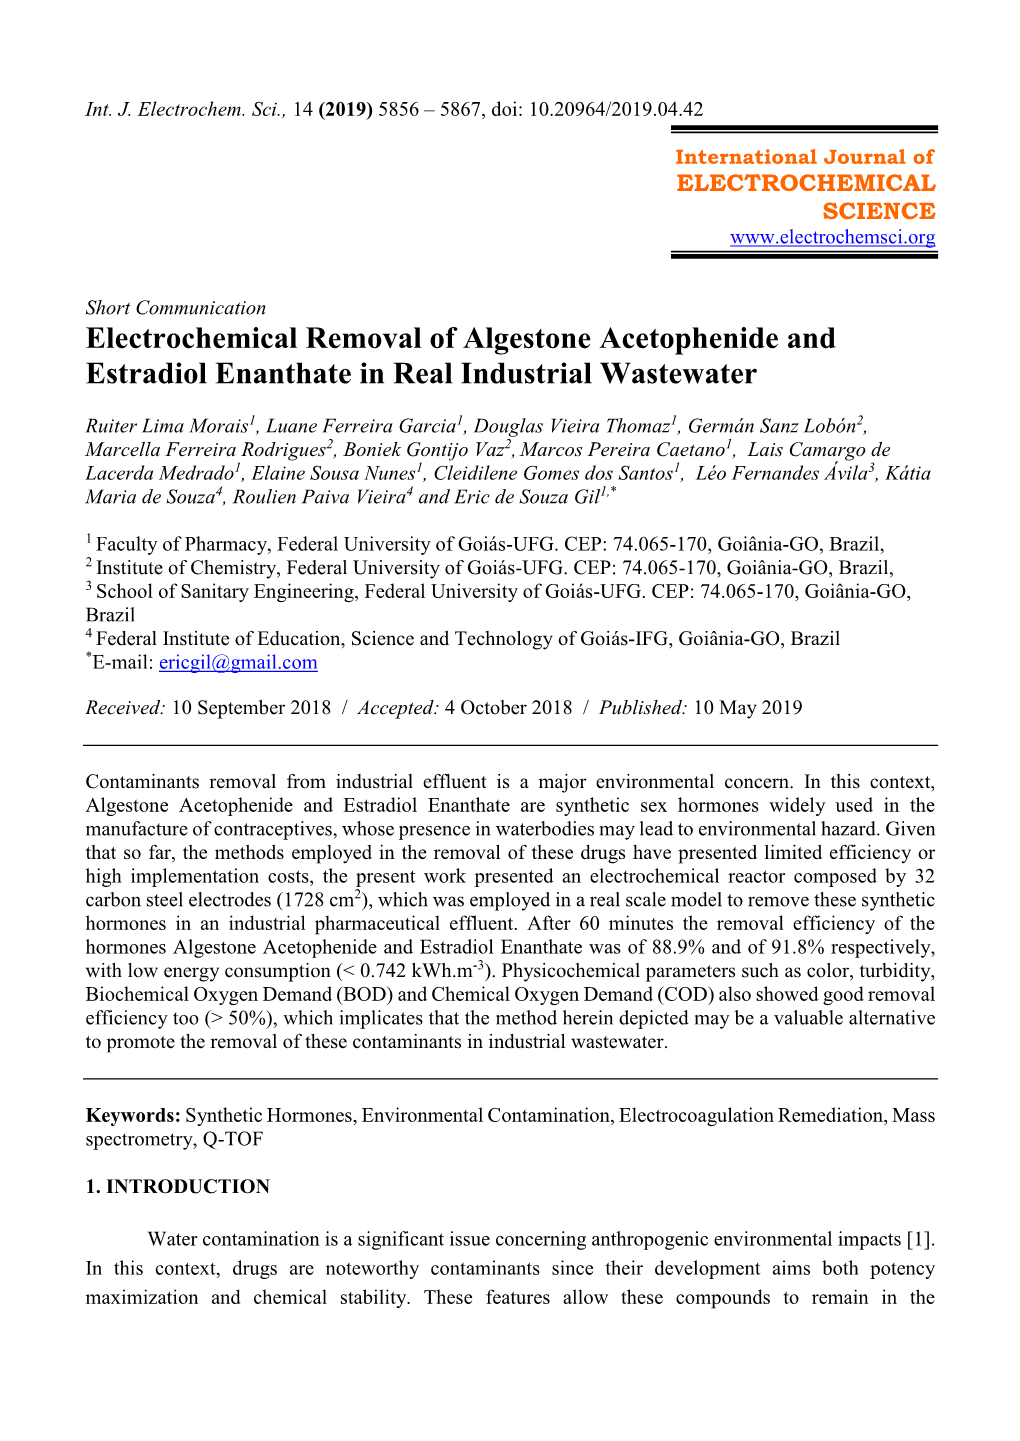 Electrochemical Removal of Algestone Acetophenide and Estradiol Enanthate in Real Industrial Wastewater